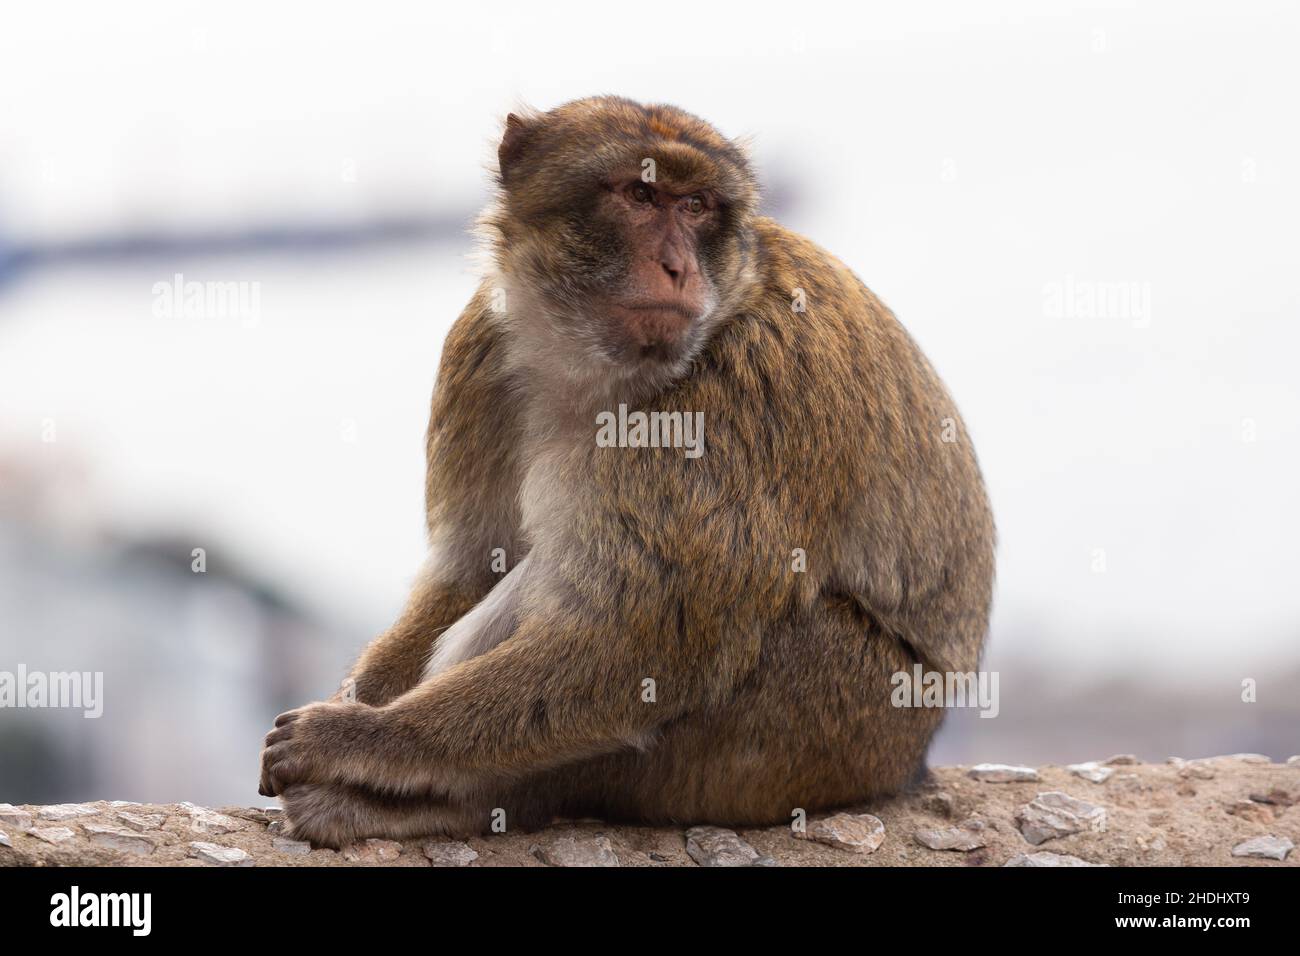 Gibraltar, United Kingdom - December 10, 2021: The Barbary macaque, also called the Gibraltar monkey, is found in some areas of the Atlas Mountains of Stock Photo